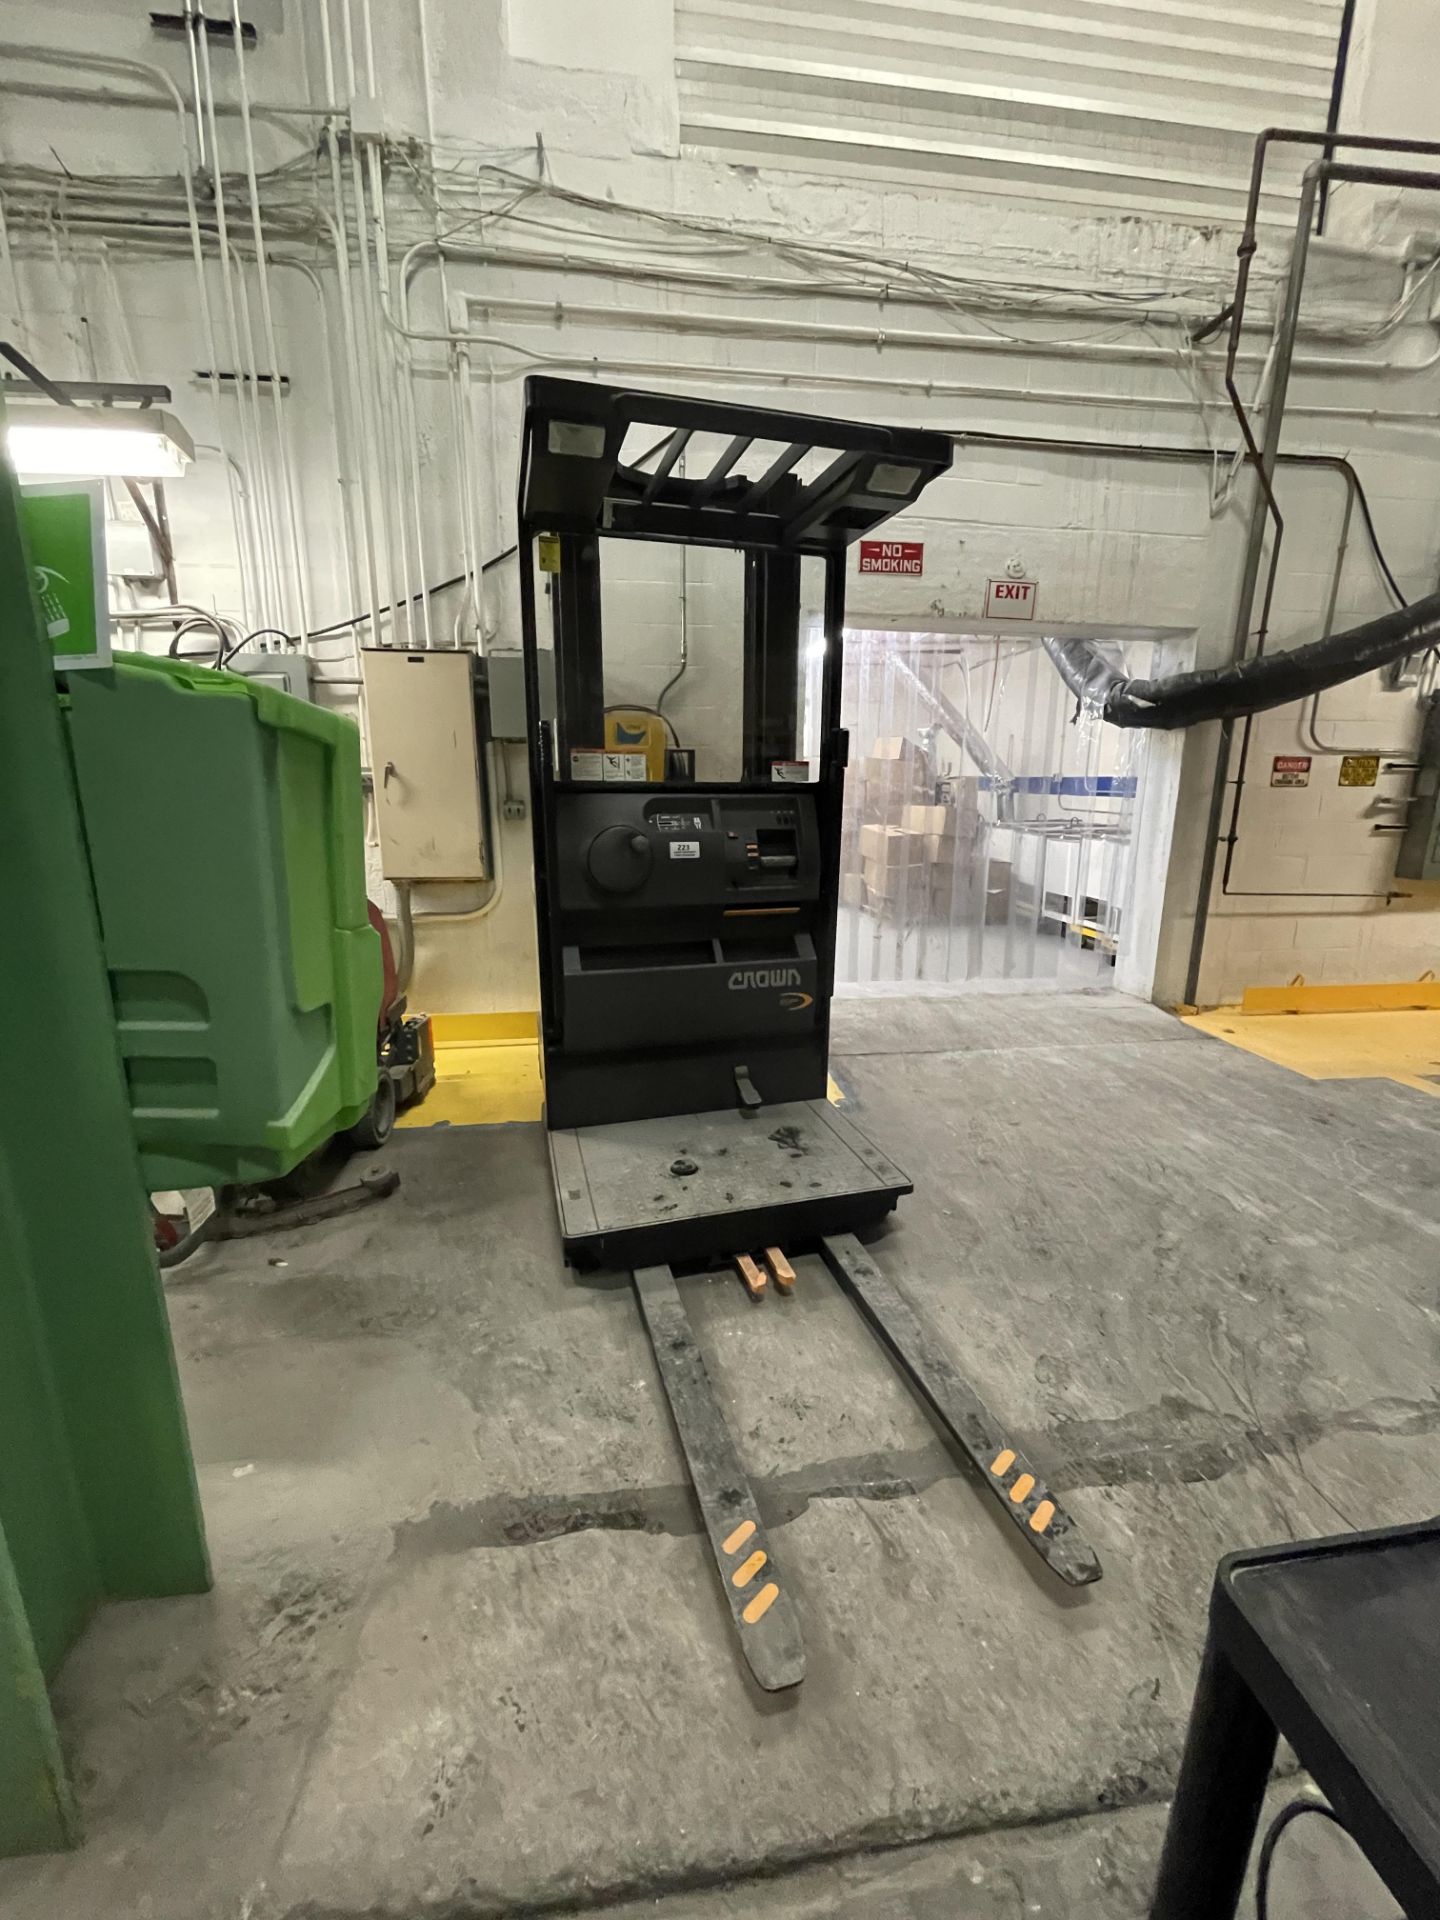 Asset 223 - Crown SP 3210 LB Electric Forklift with 42" forks, truck type E, serial#1A378638 ~